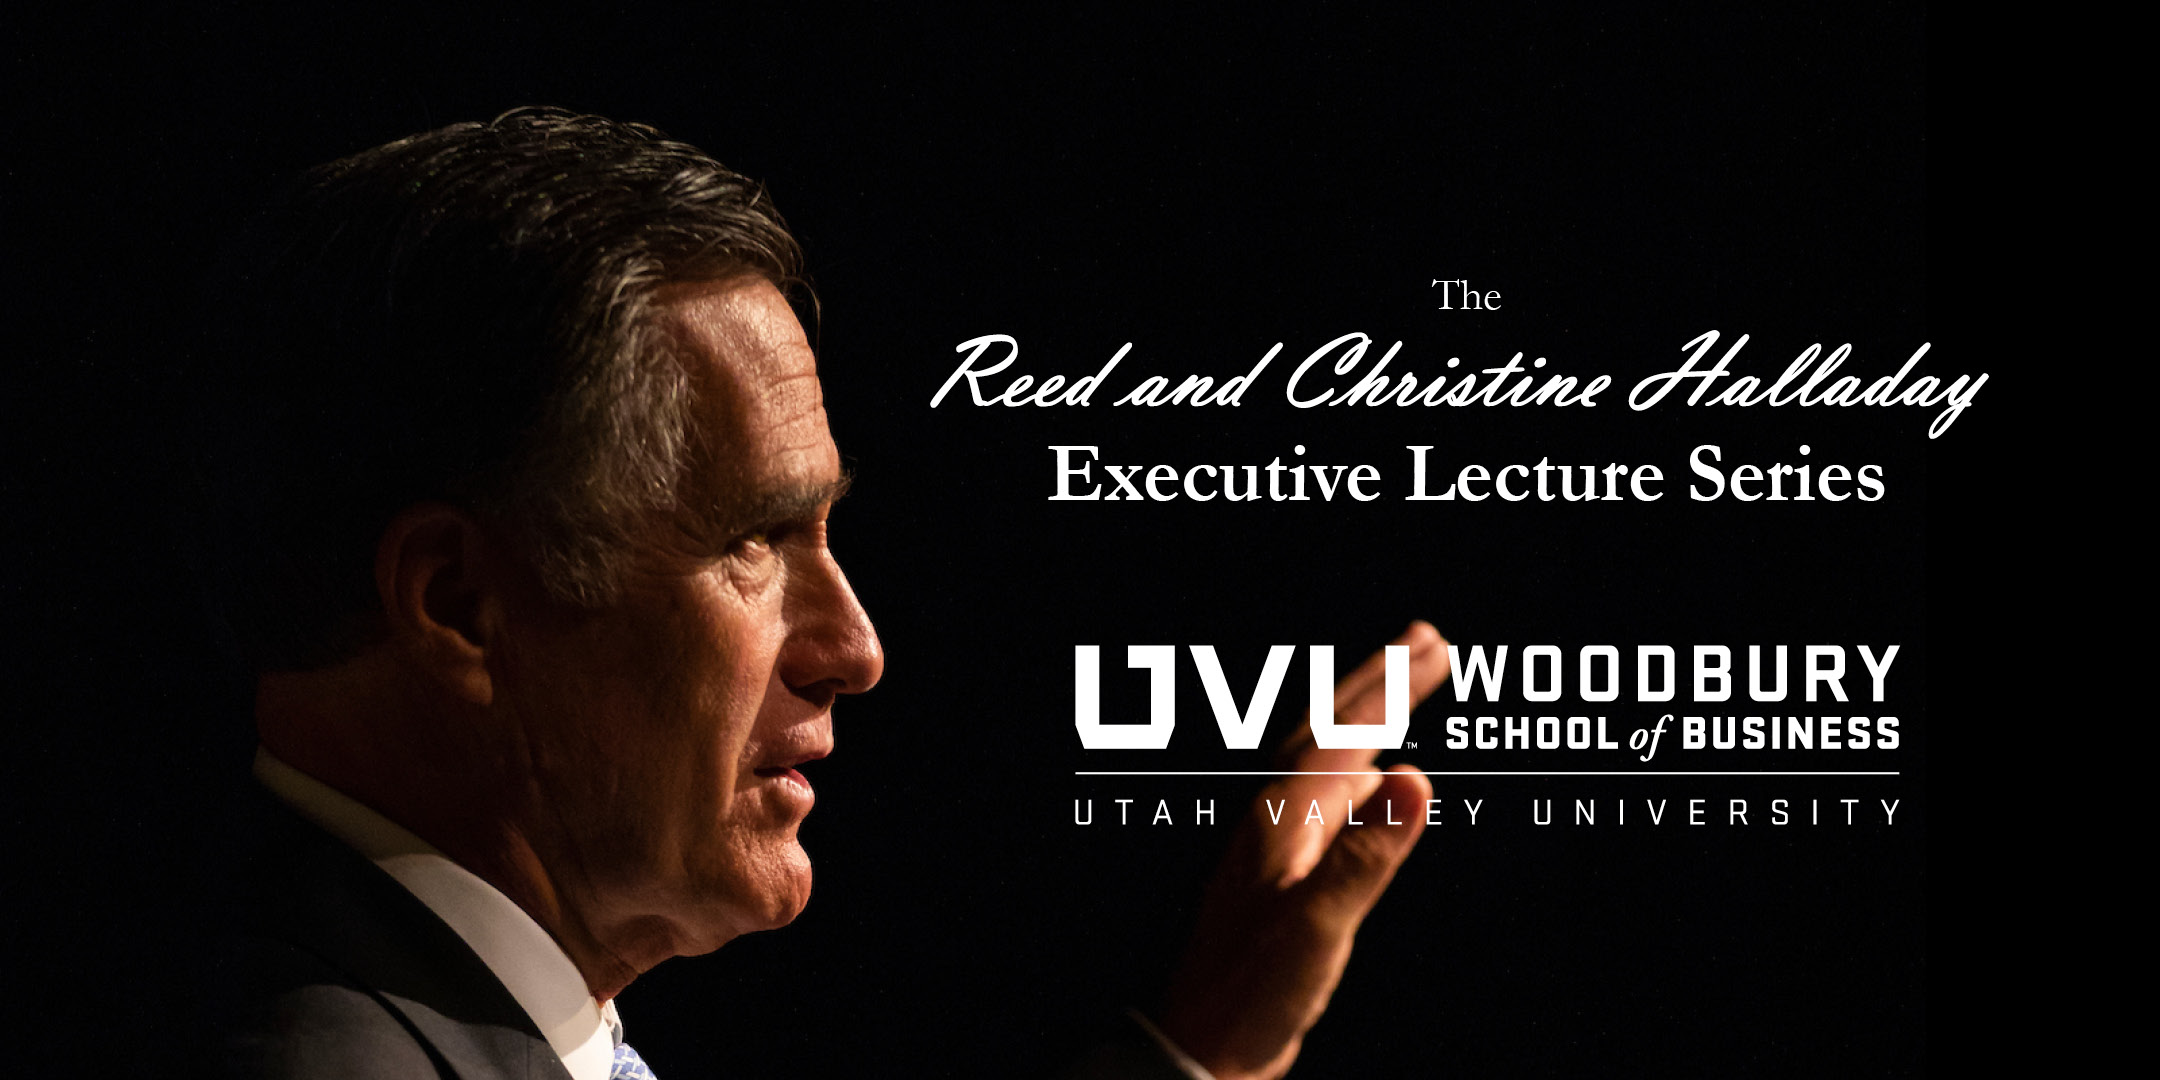 Mitt Romney in profile - The Reed and Christine Halladay Executive Lecture Series, Woodbury School of Business Logo